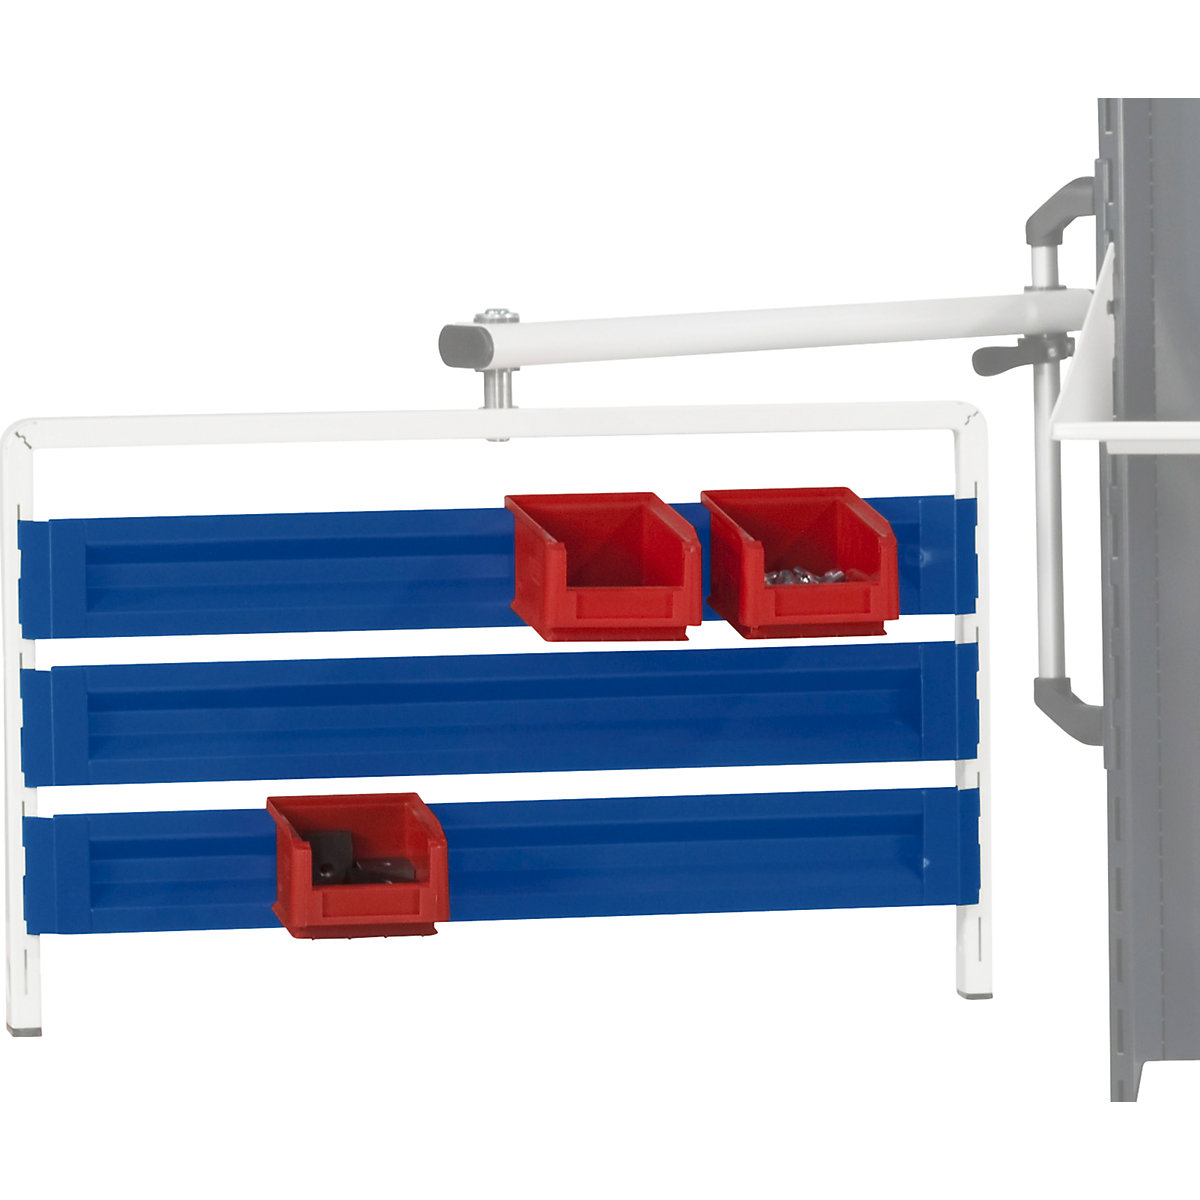 Suspension rail for open fronted storage bins - ANKE